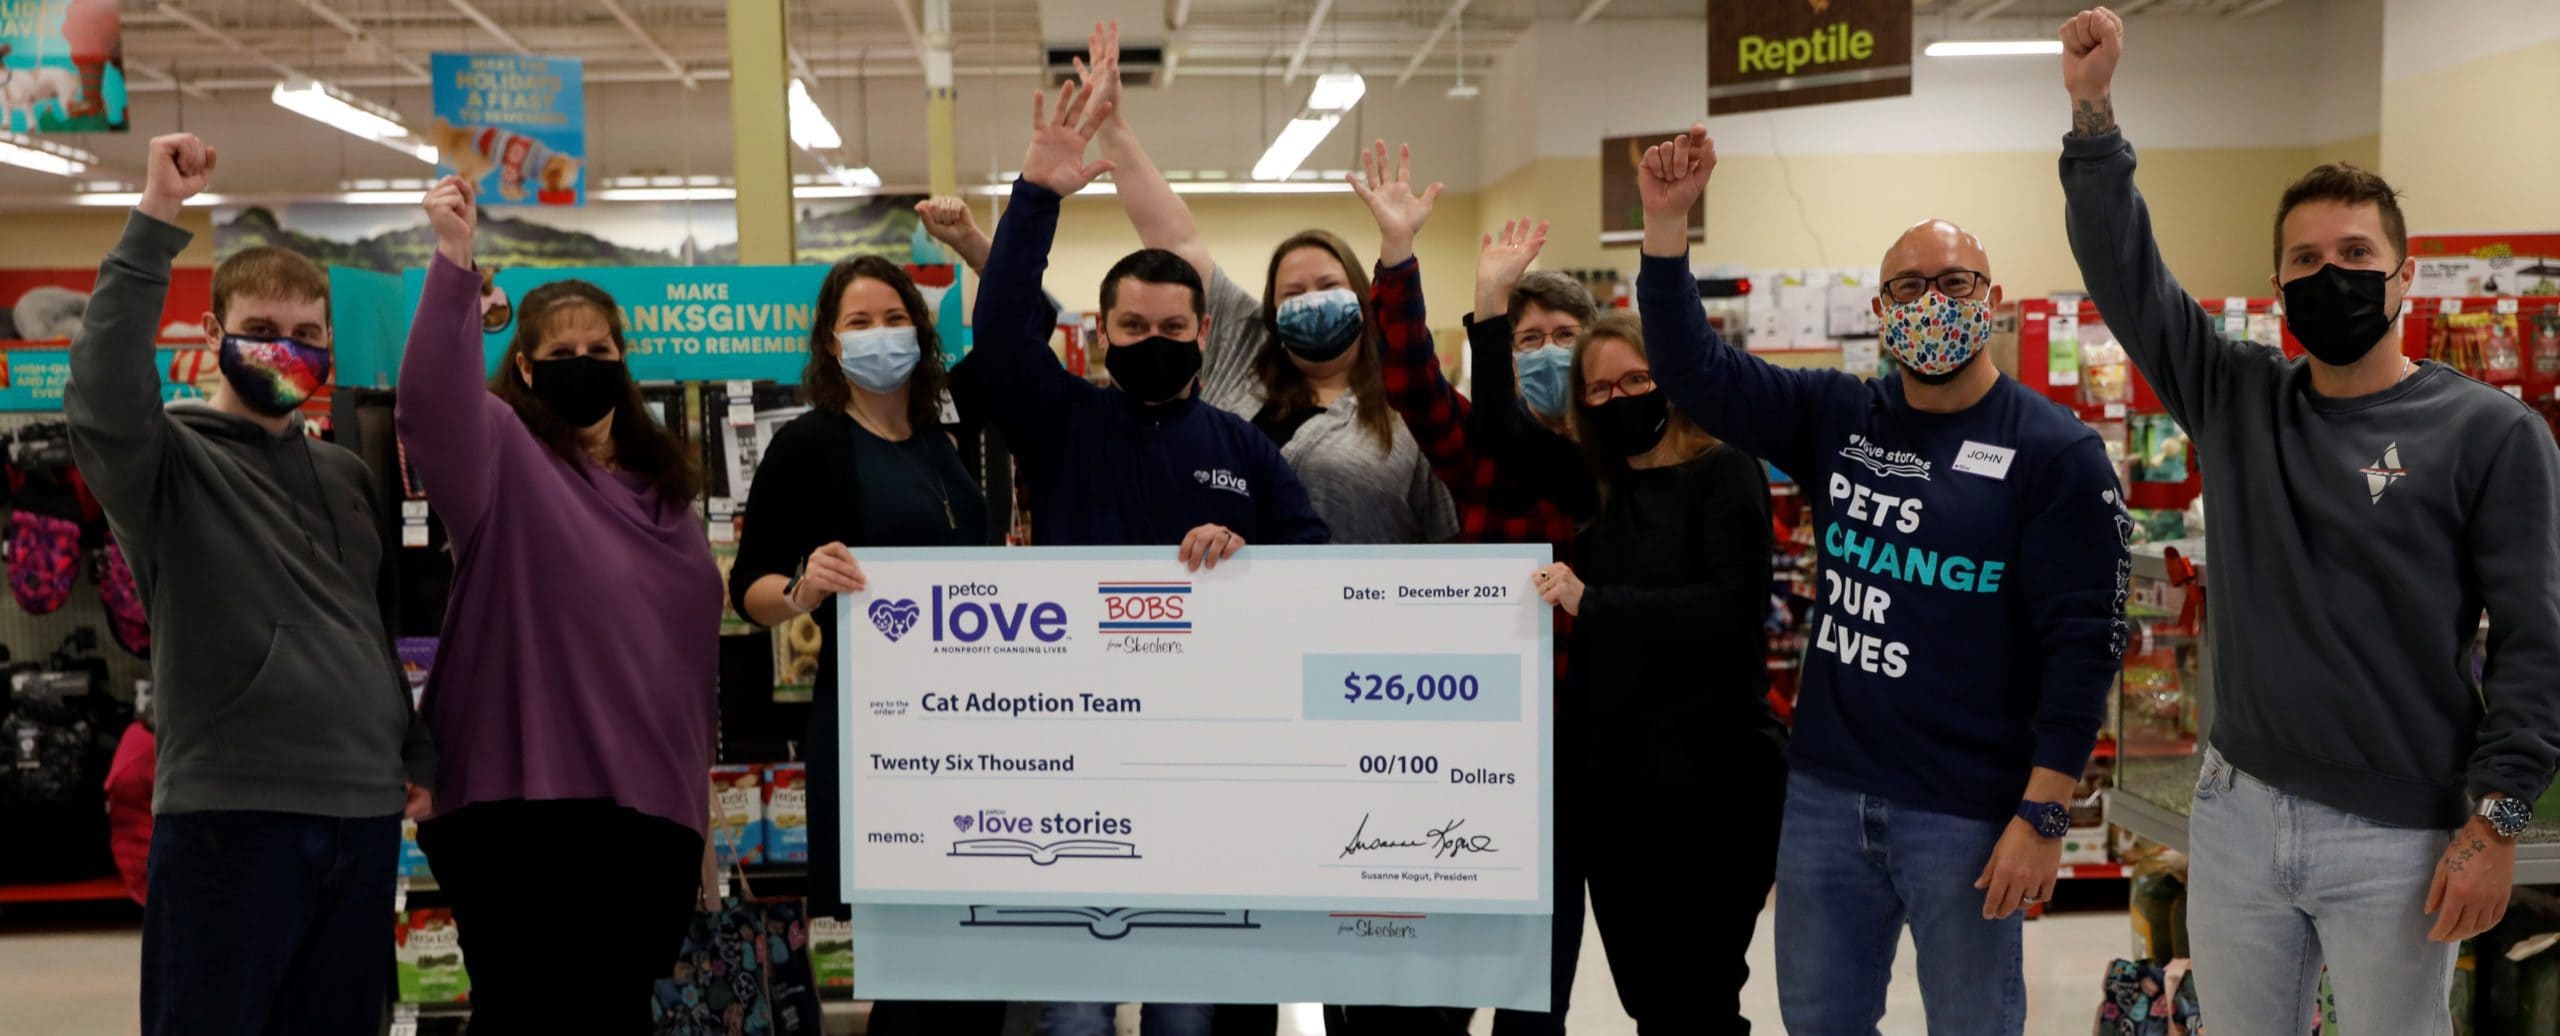 A group of people in face masks raise their hands in celebration behind a large novelty check for $26,000 to Cat Adoption Team from Petco Love.